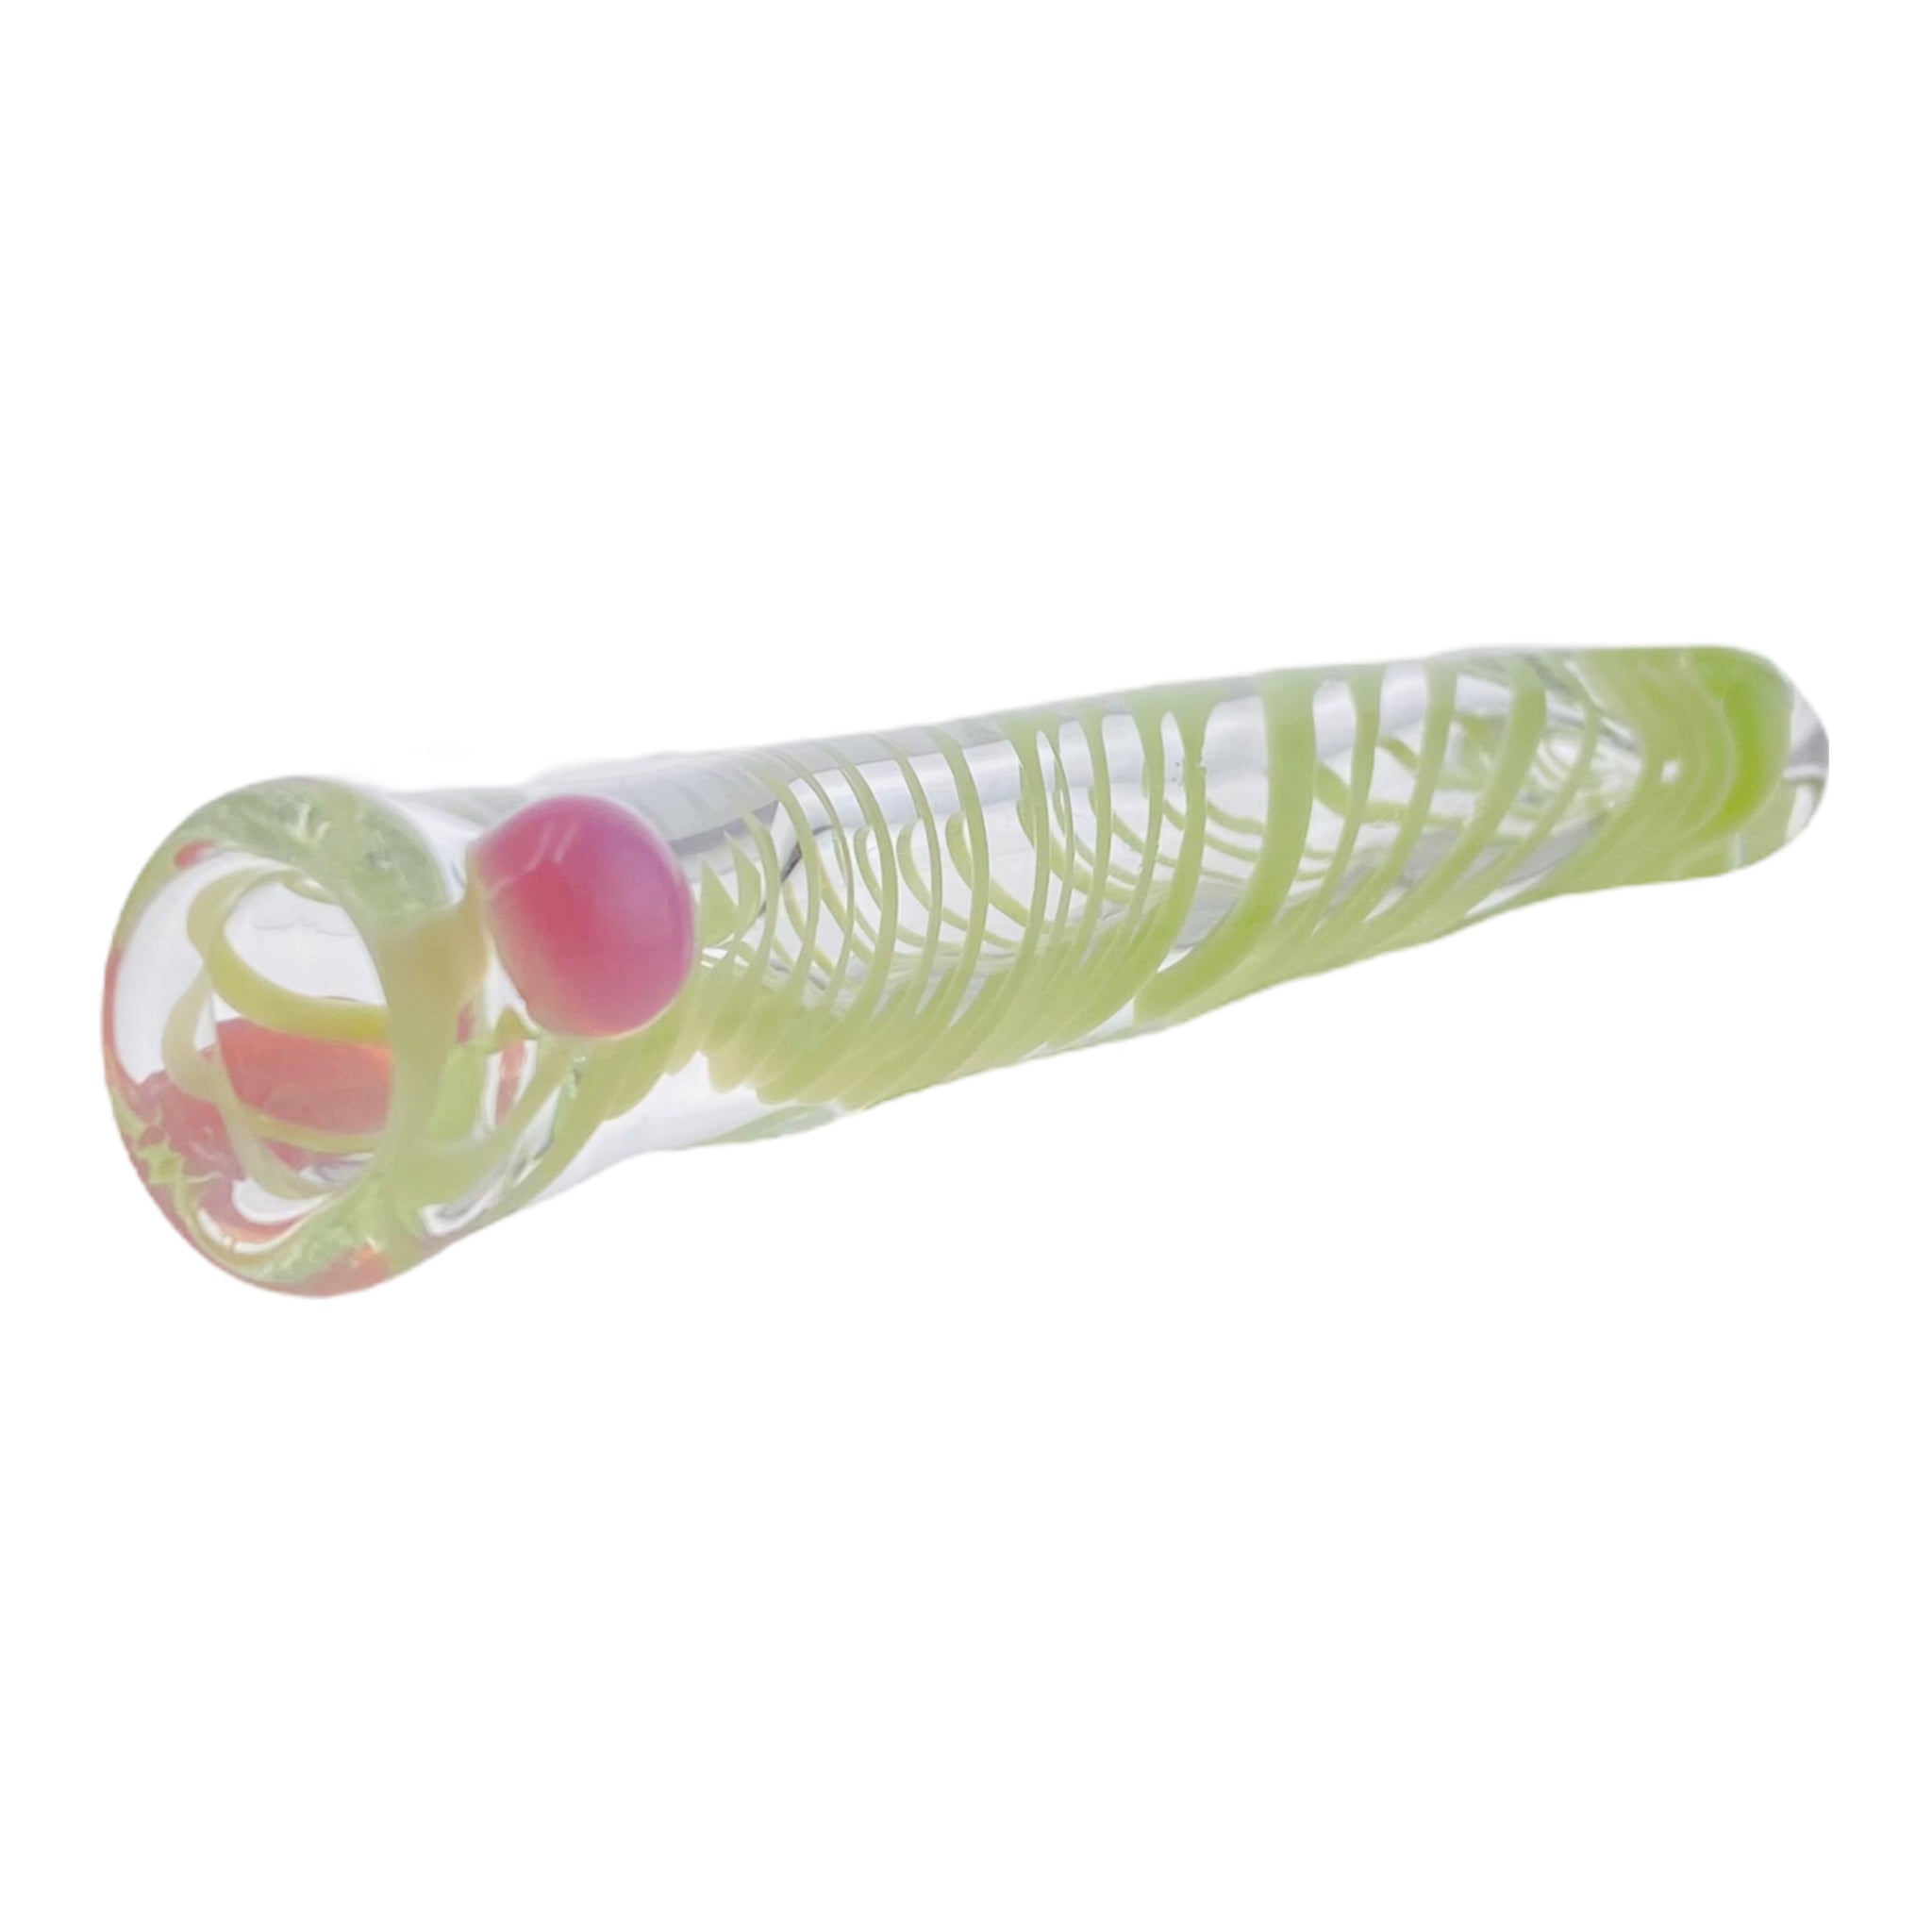 Glass Chillum Pipe - Green Spiral With Pink Dots